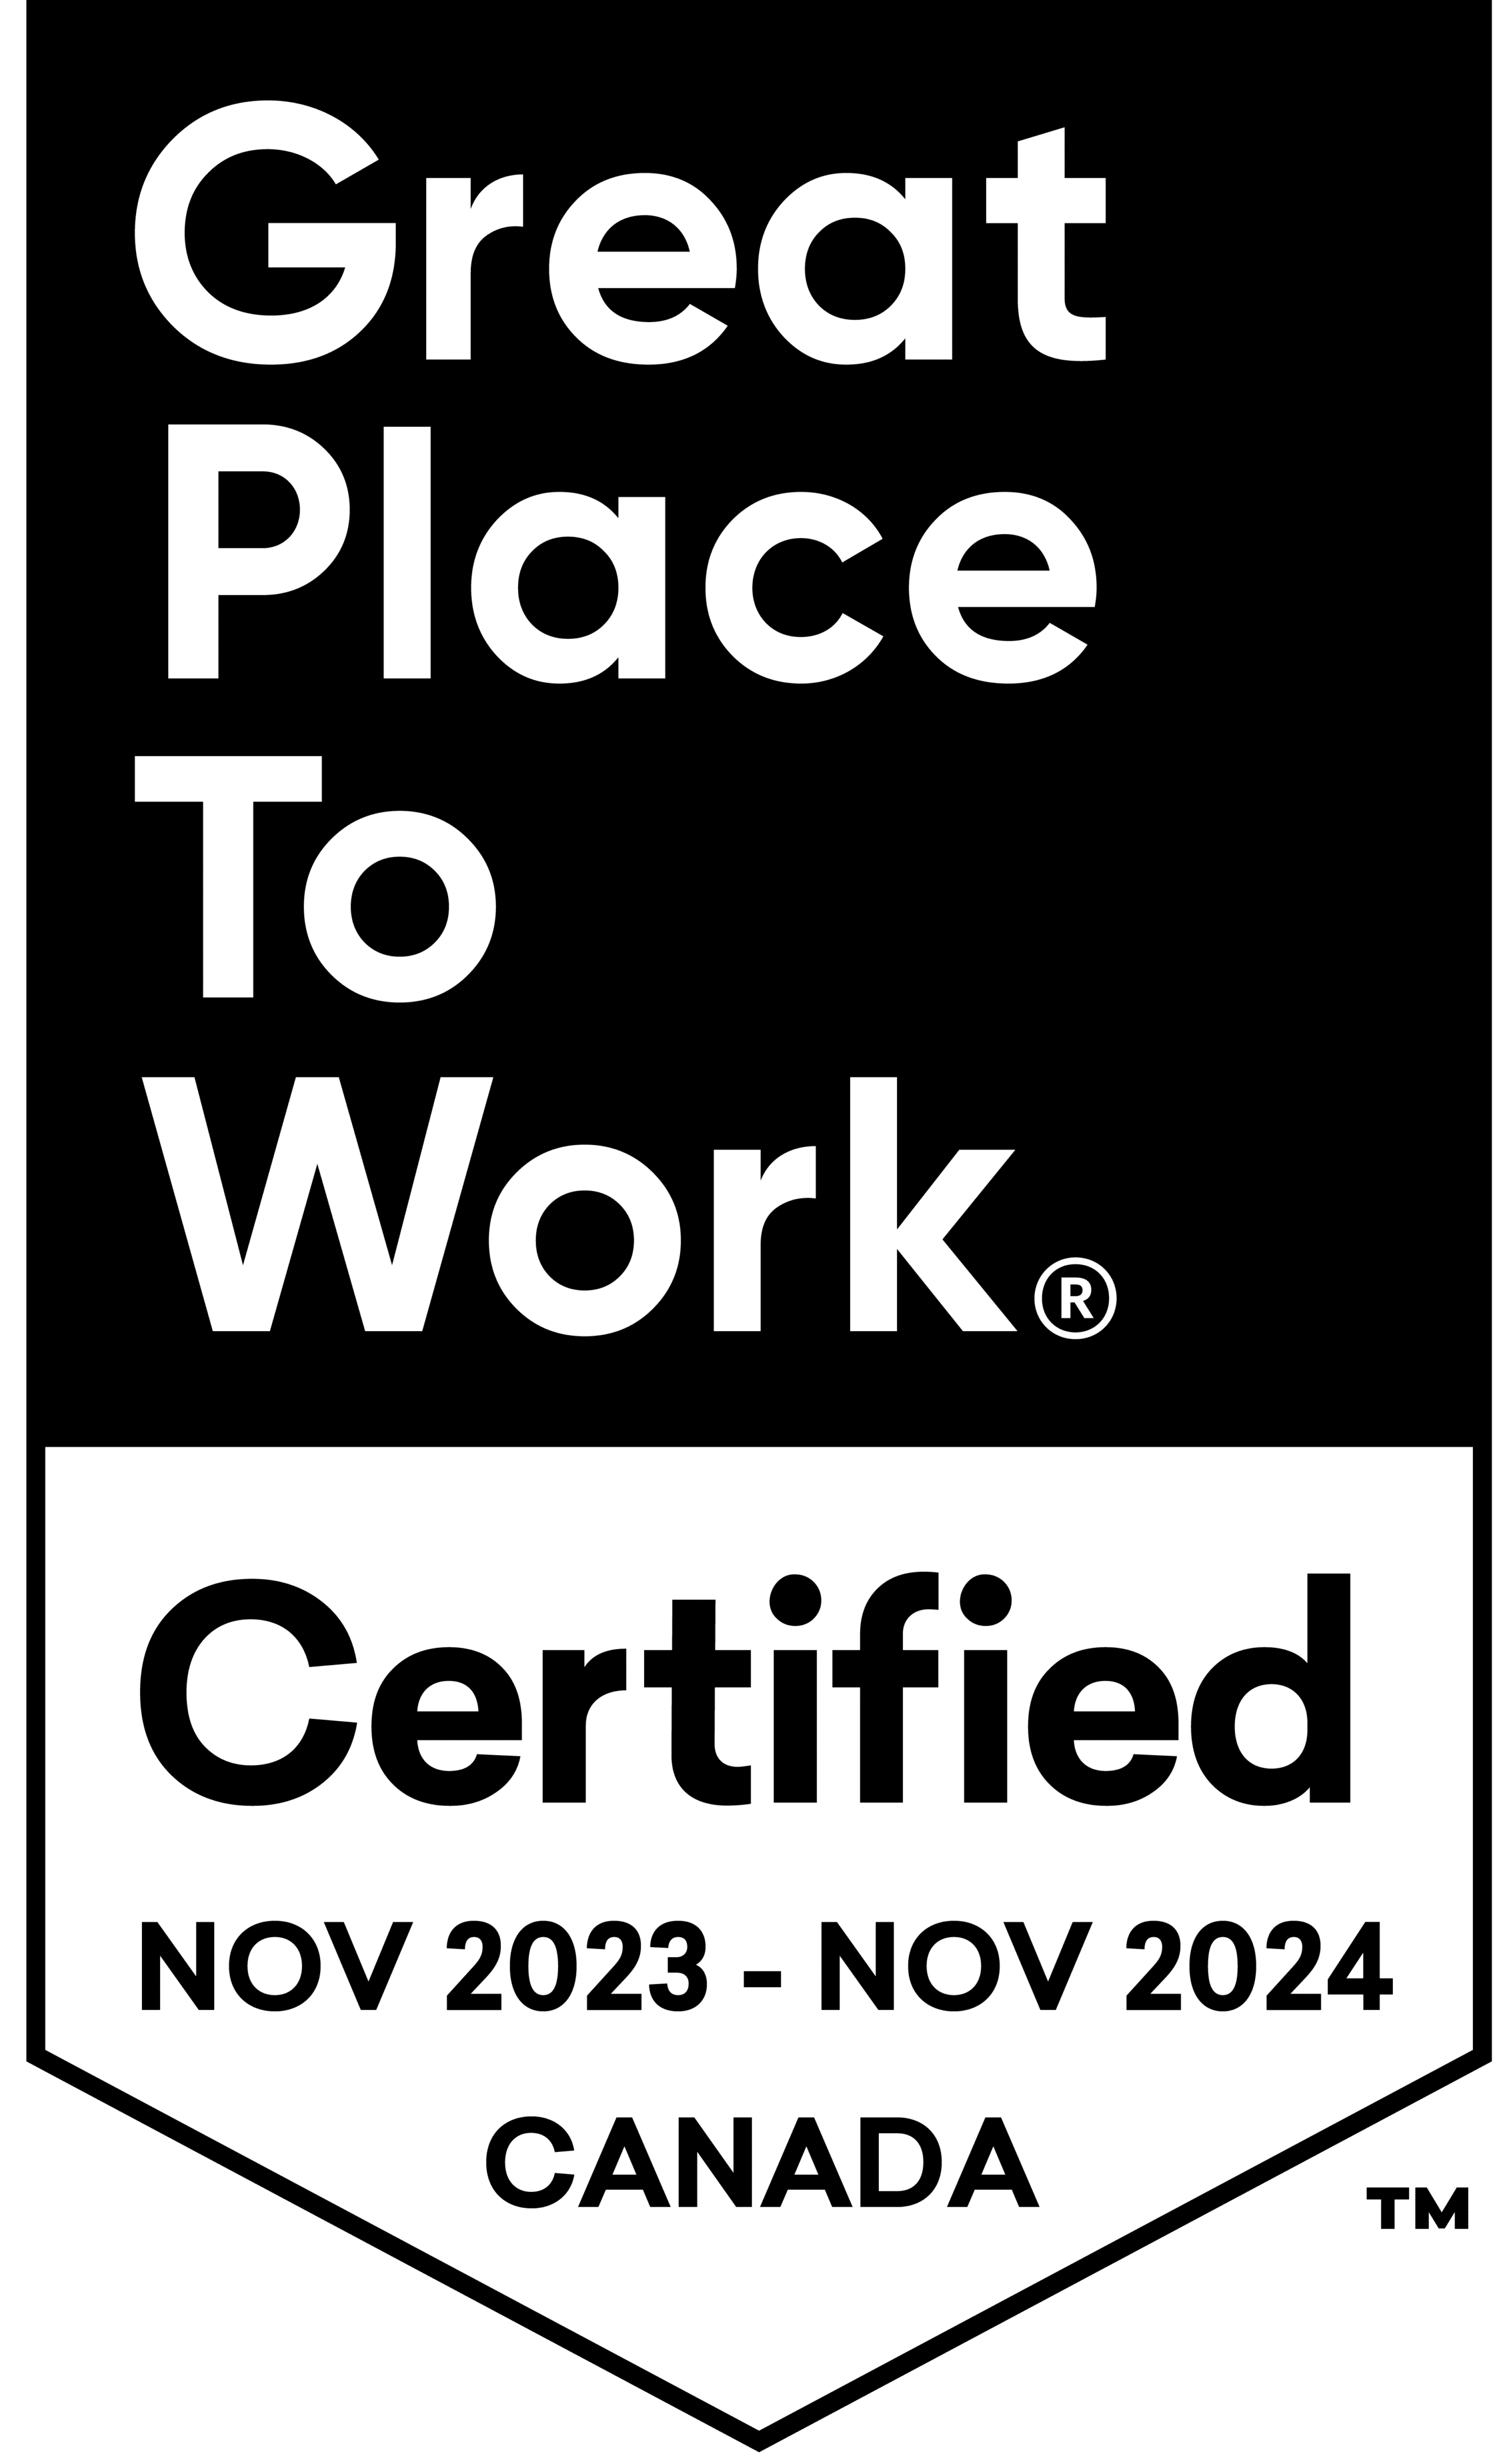 Great Place to Work- Certification Logo 2023